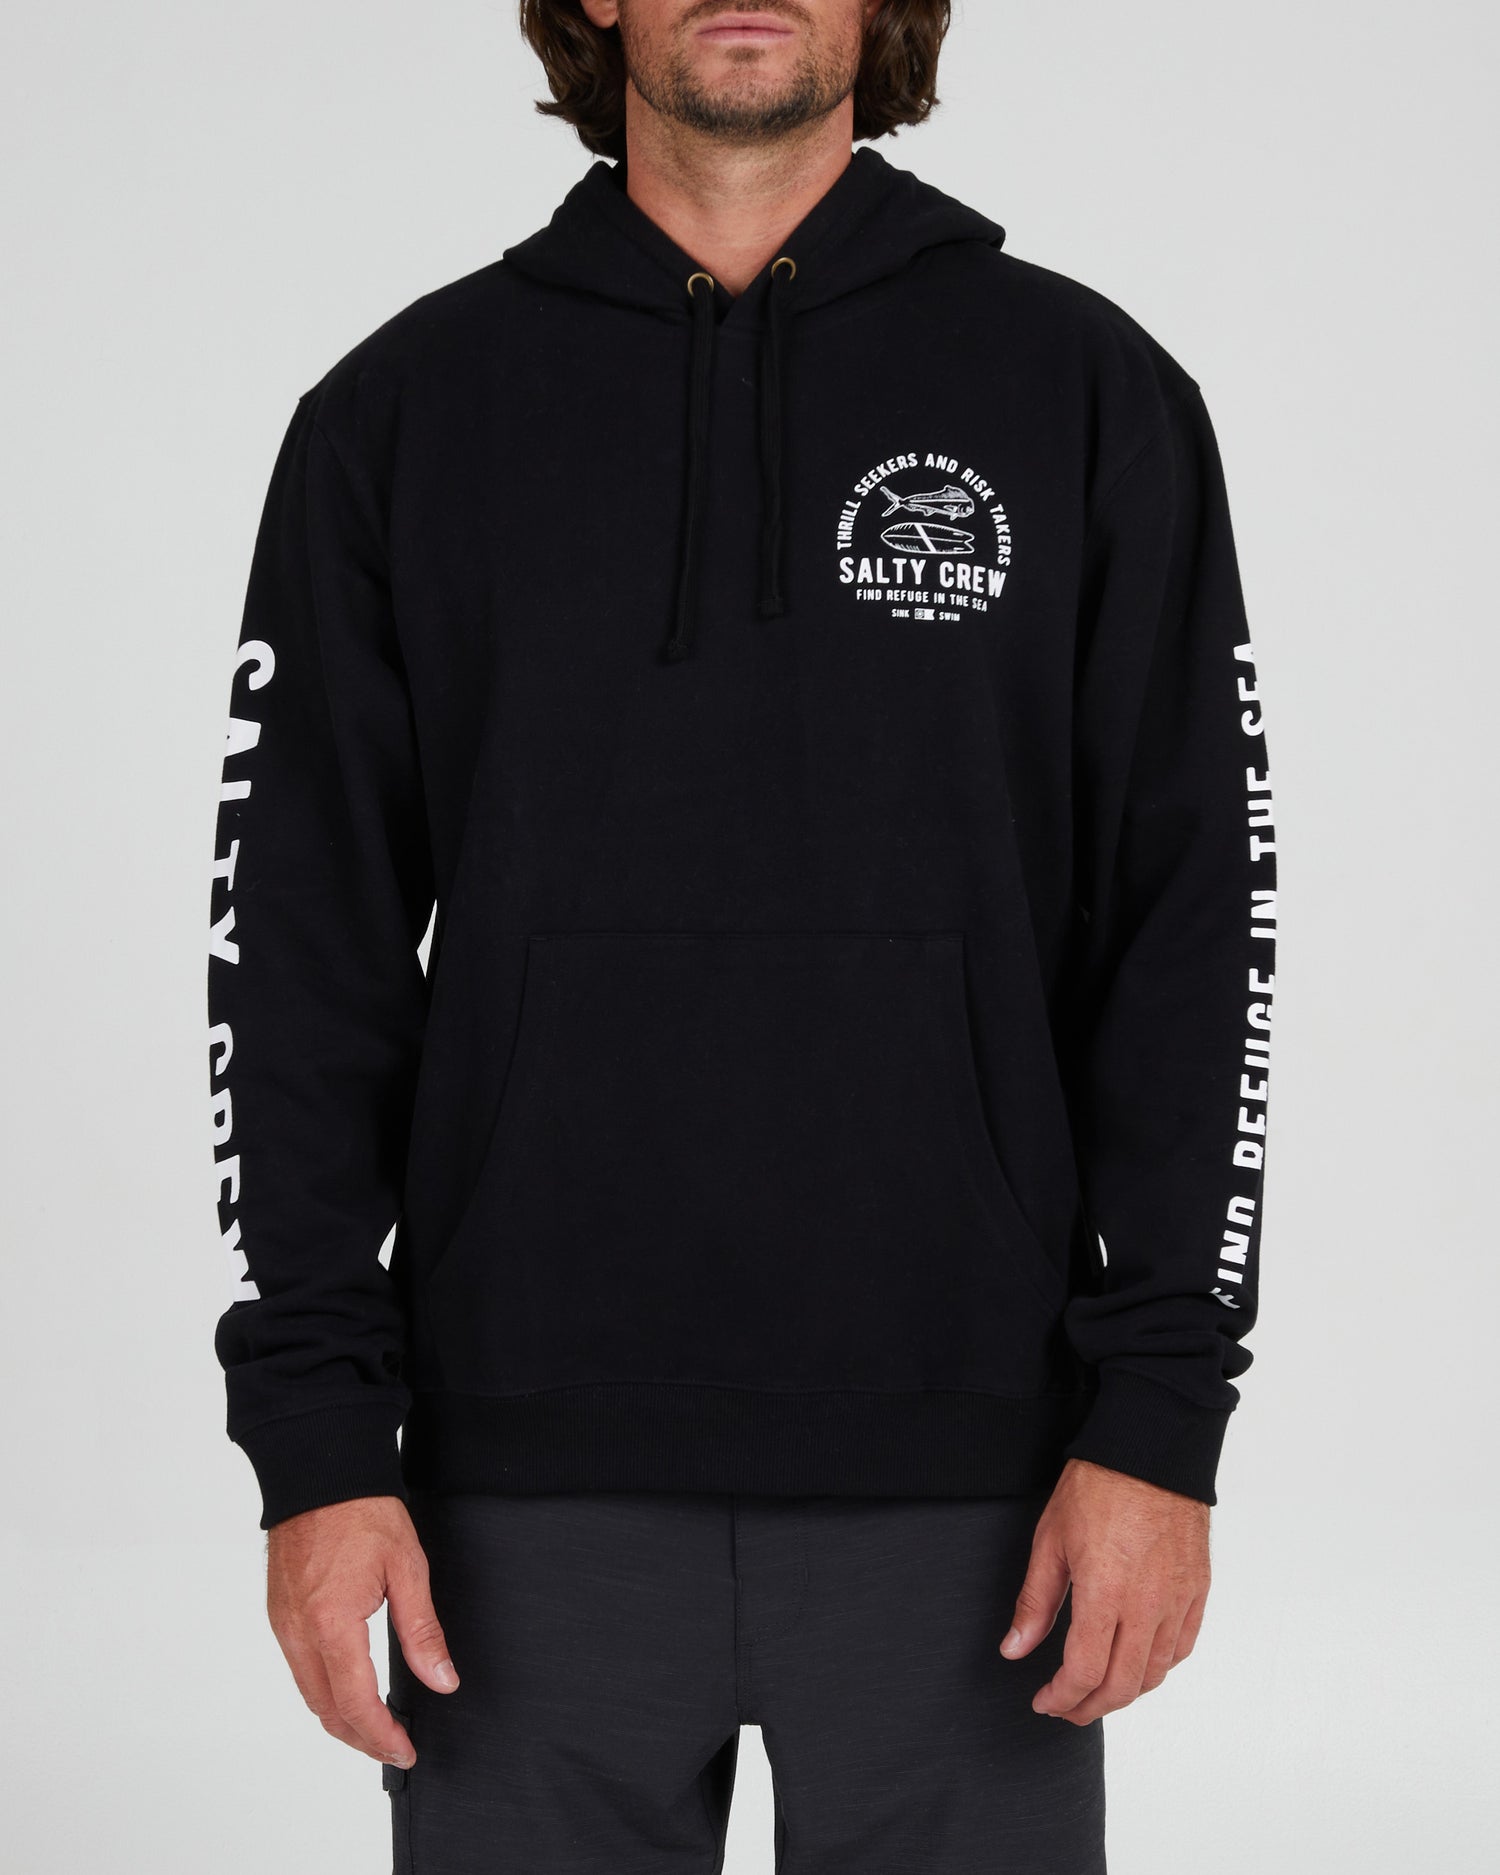 On body front of the Lateral Line Black Hooded Fleece